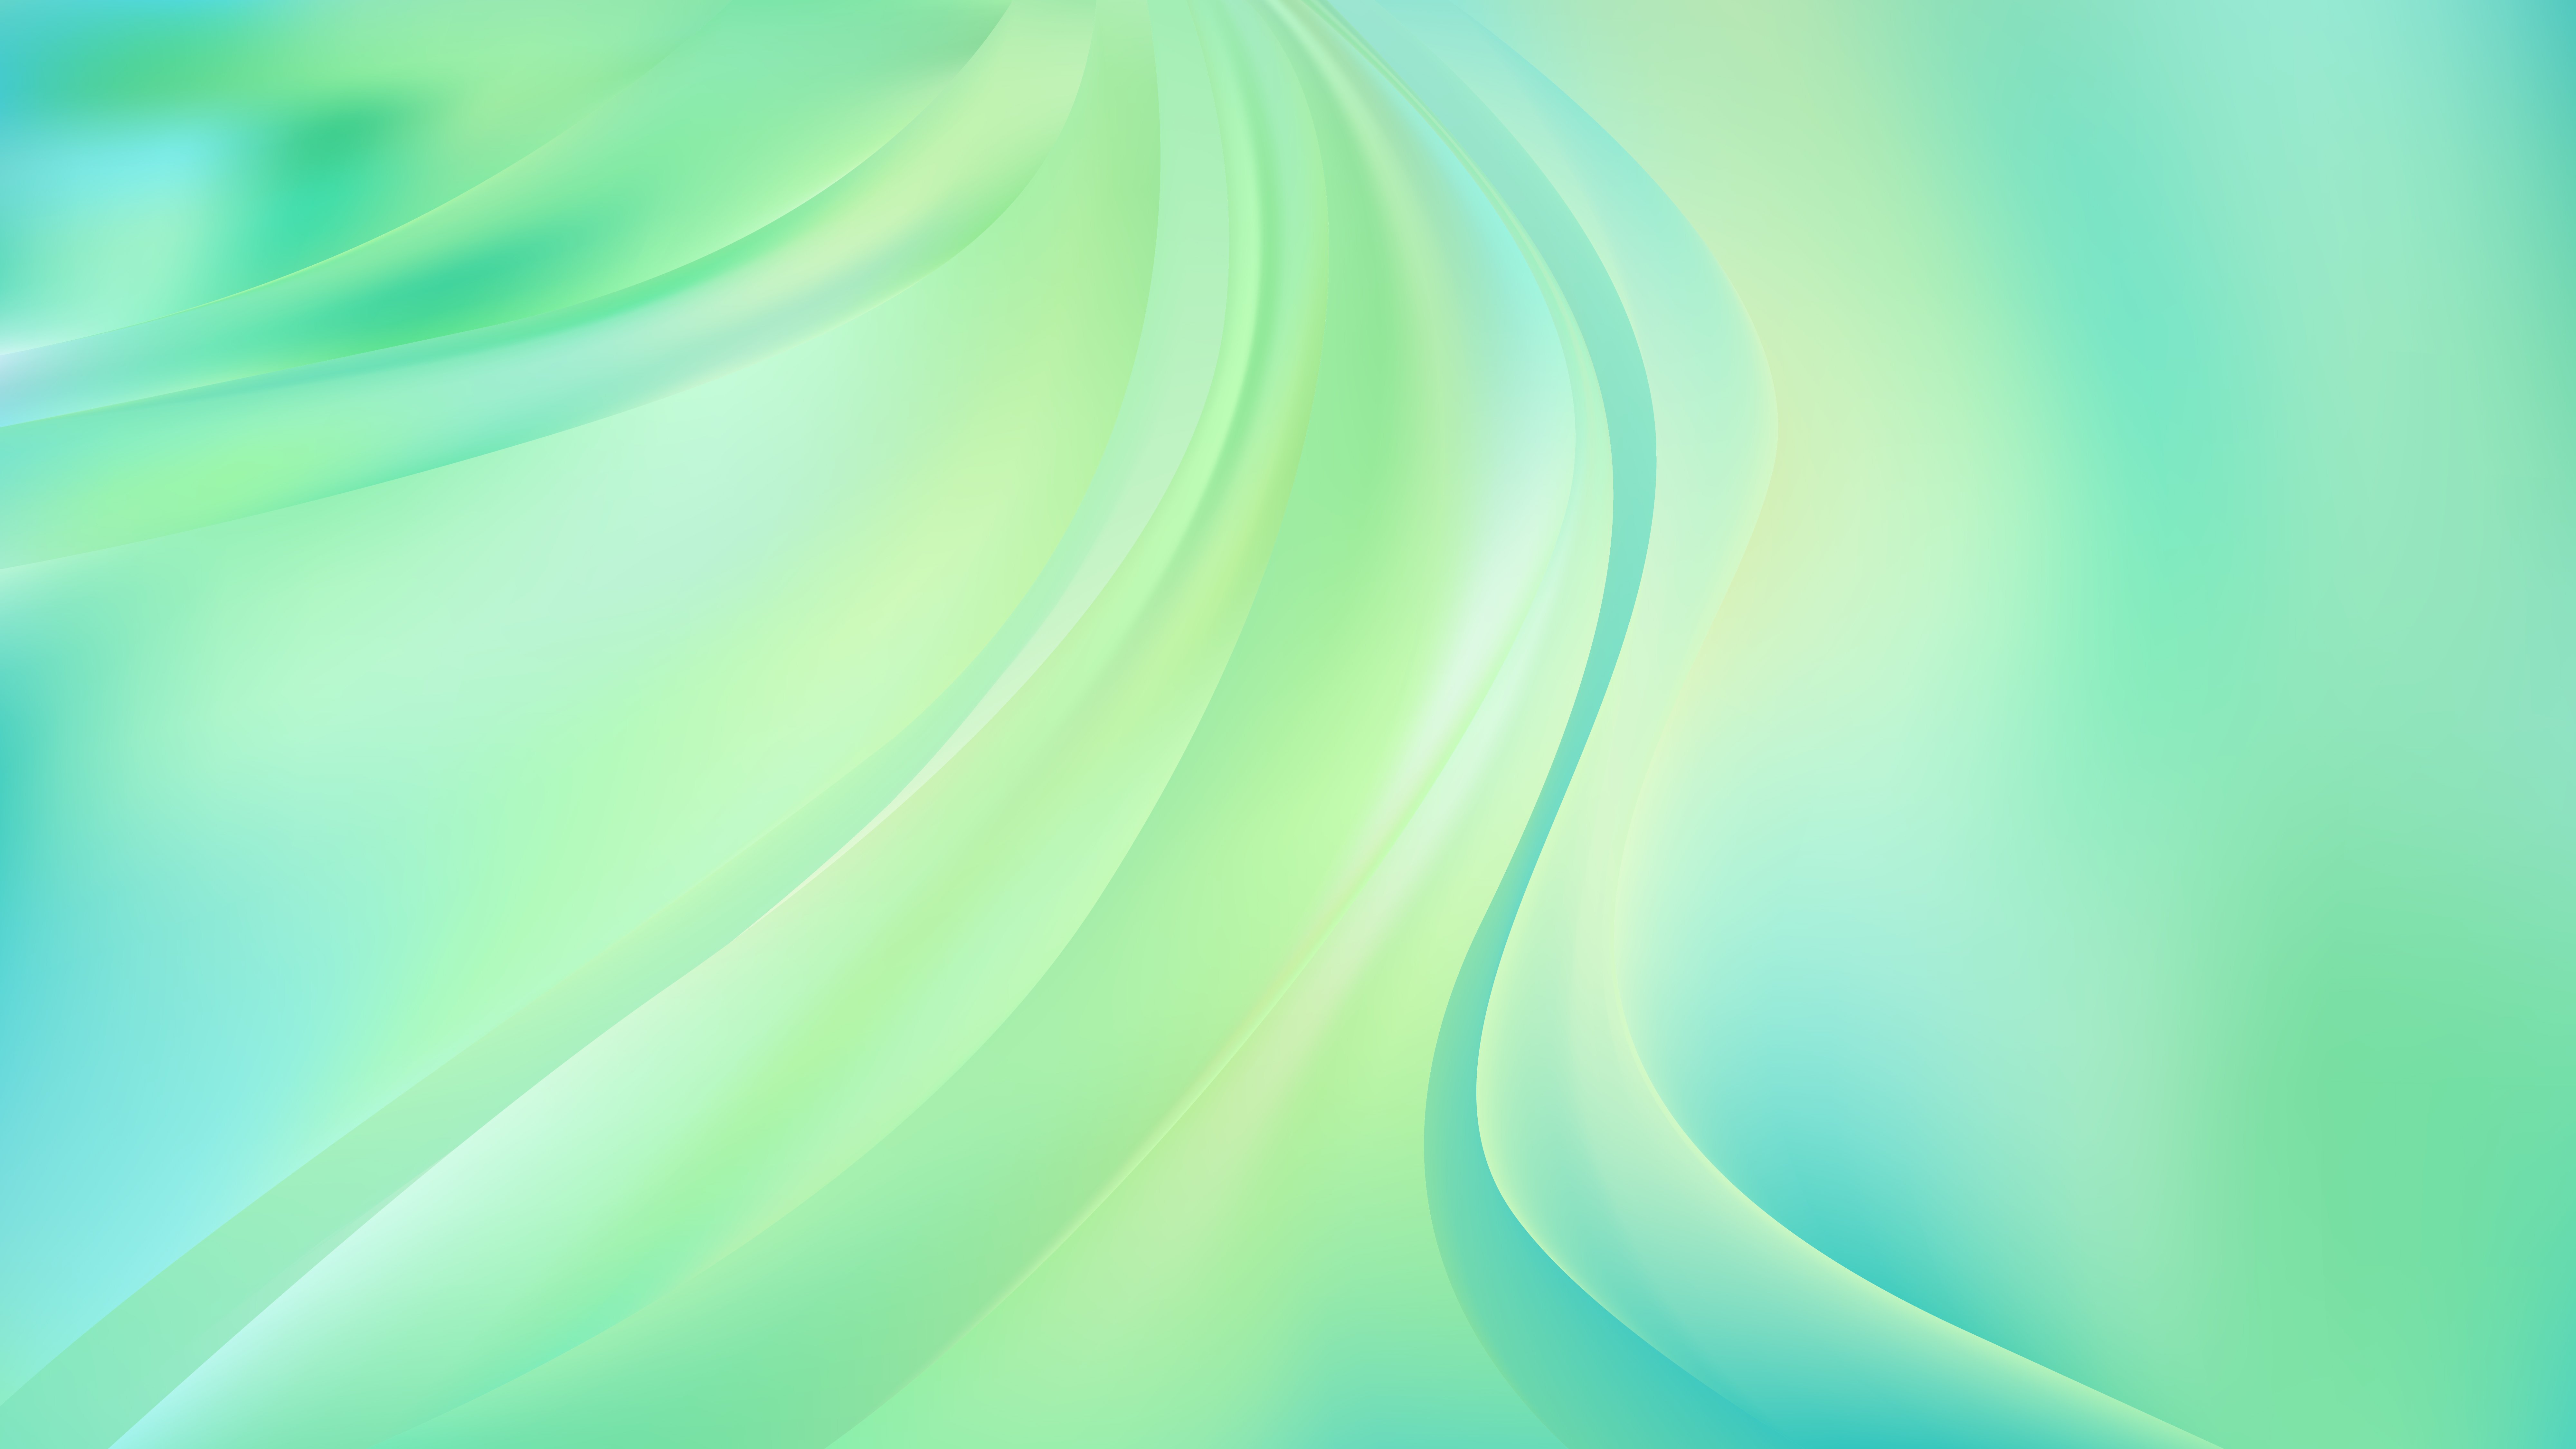  Abstract Glowing Mint Green Wave Background 8000x4500